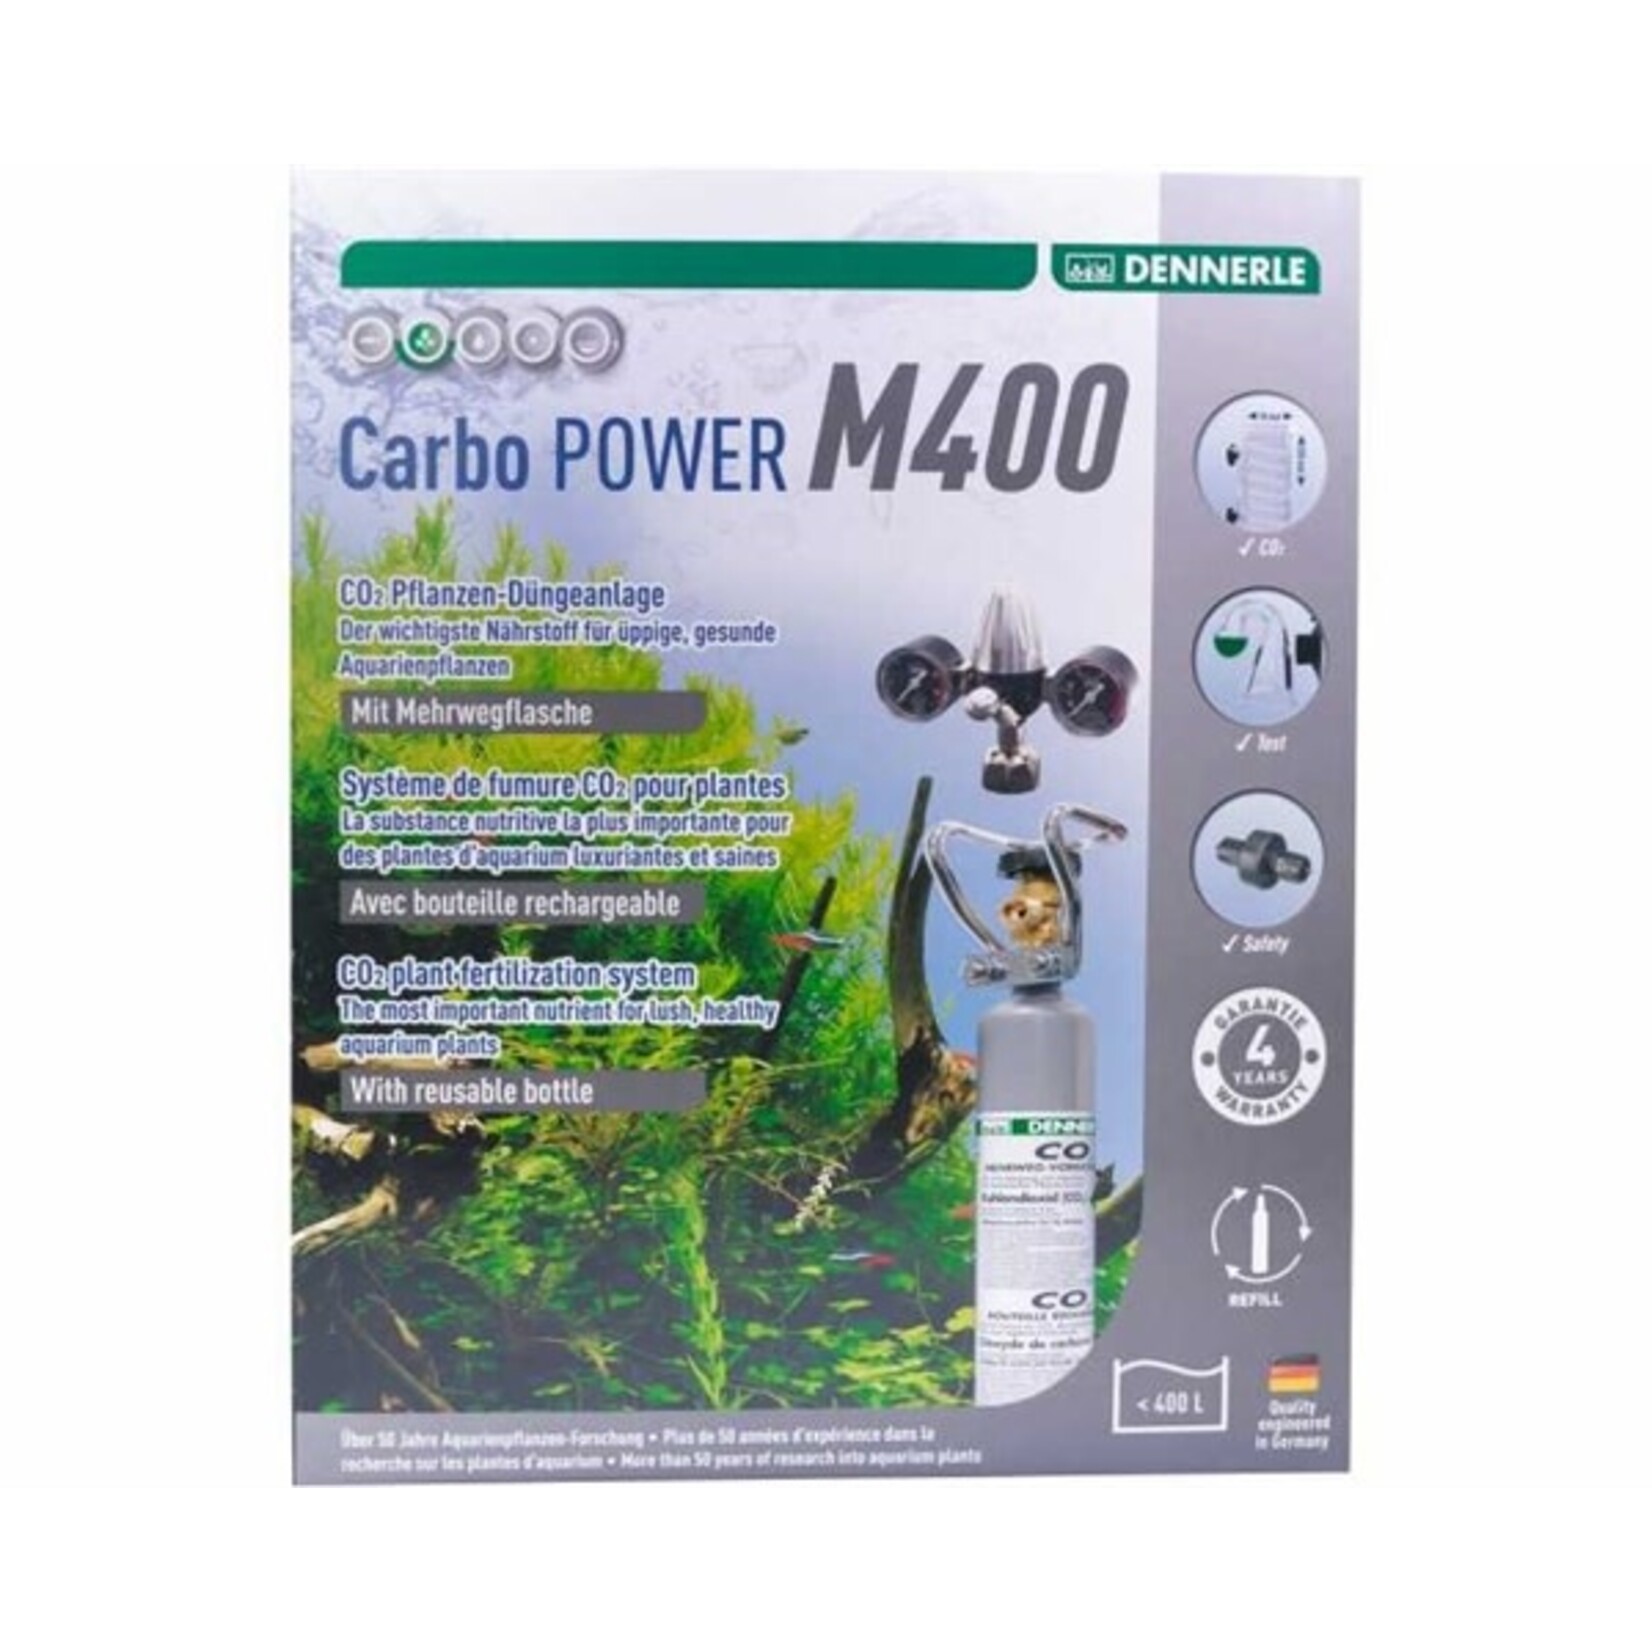 Dennerle co2 carbo power m400